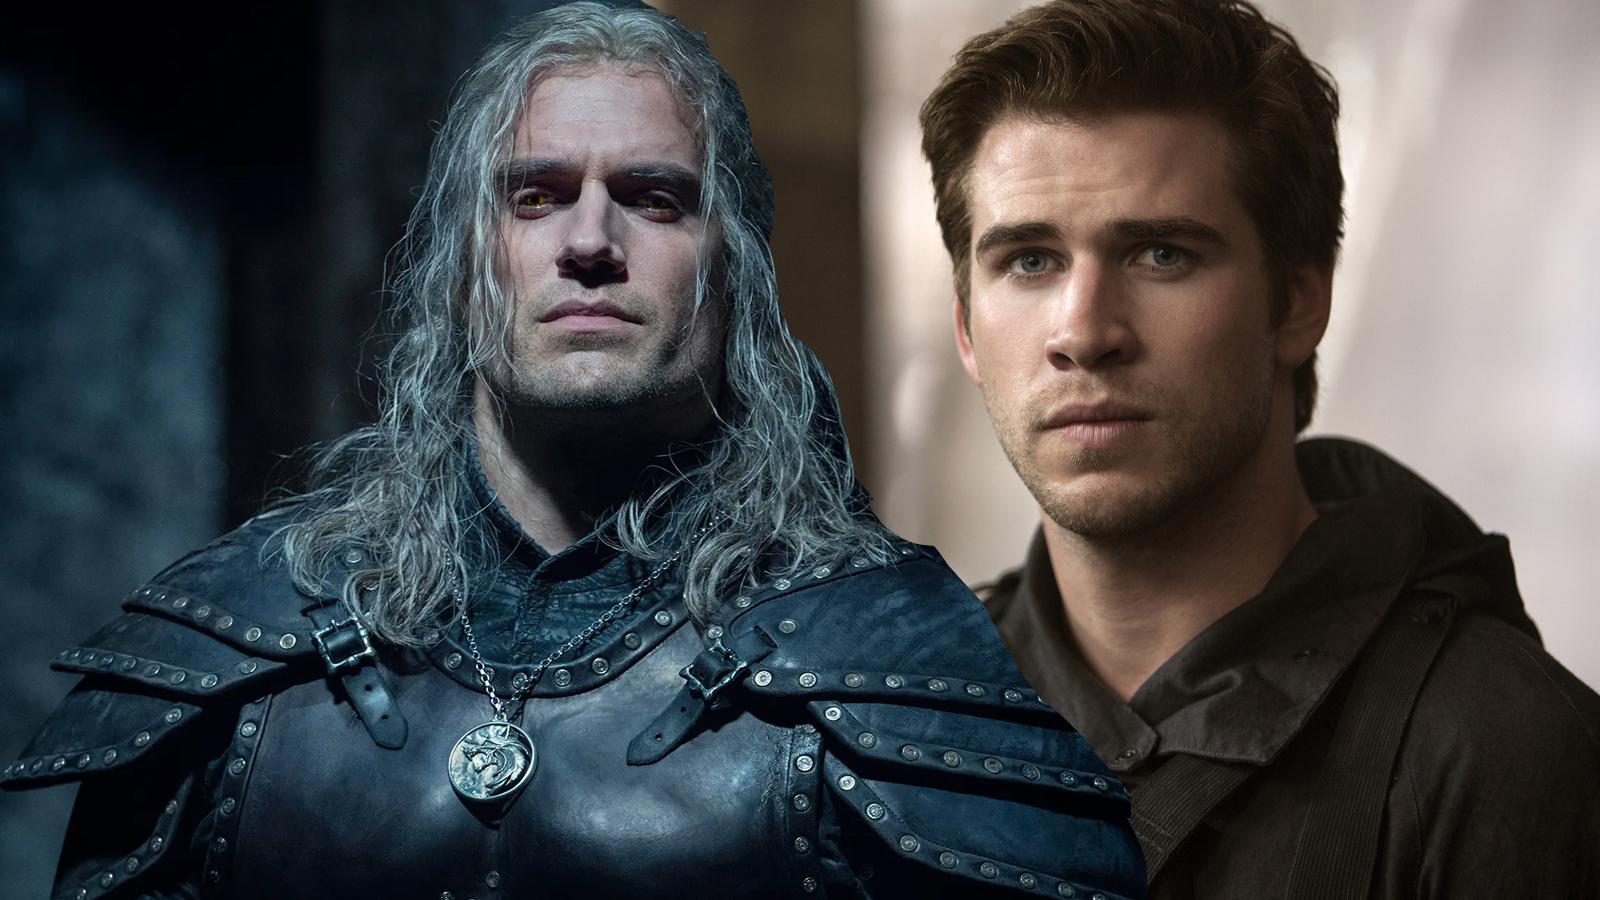 The Witcher Season 3: Did Henry Cavill Come Back and Return as Geralt?